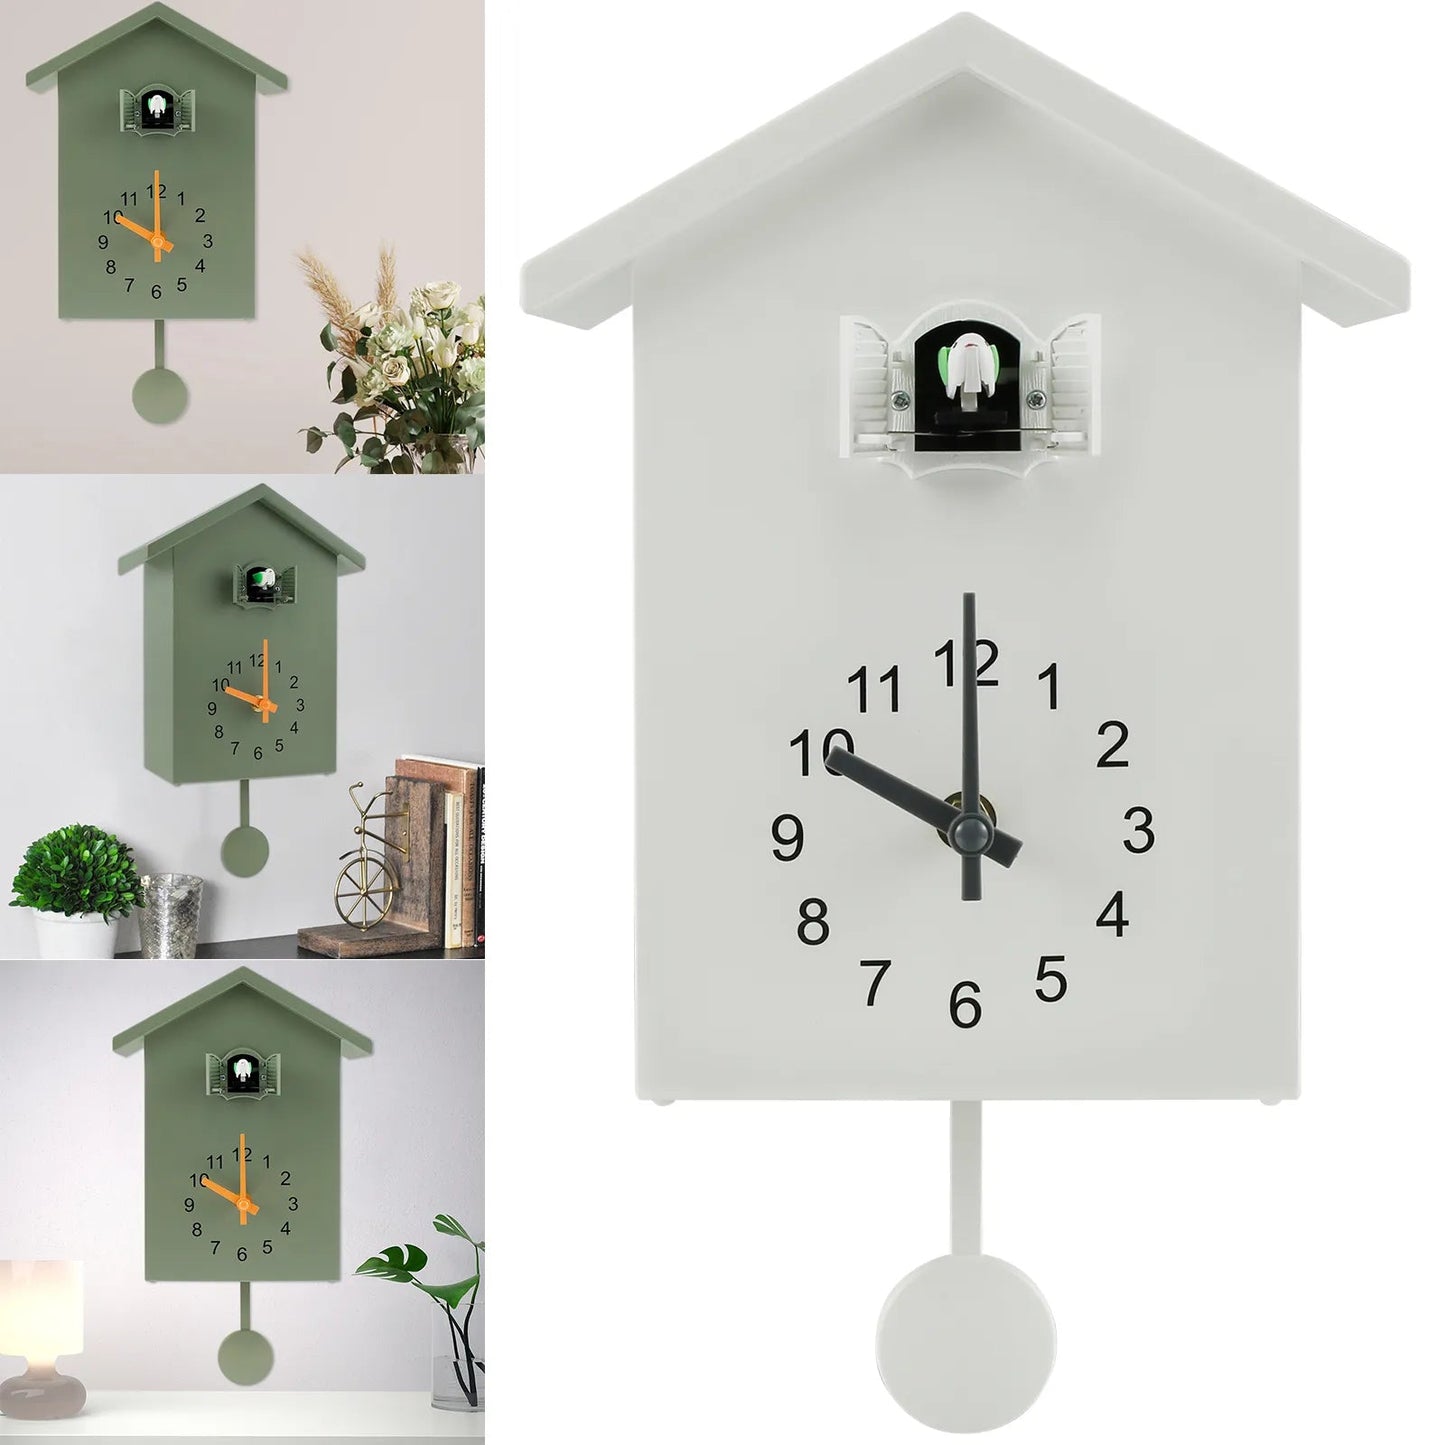 Cuckoo Clock with Chimer Cuckoo Sound Clocks with Pendulum Bird House Battery Powered Home Living Room Kitchen Wall Decoration acacuss